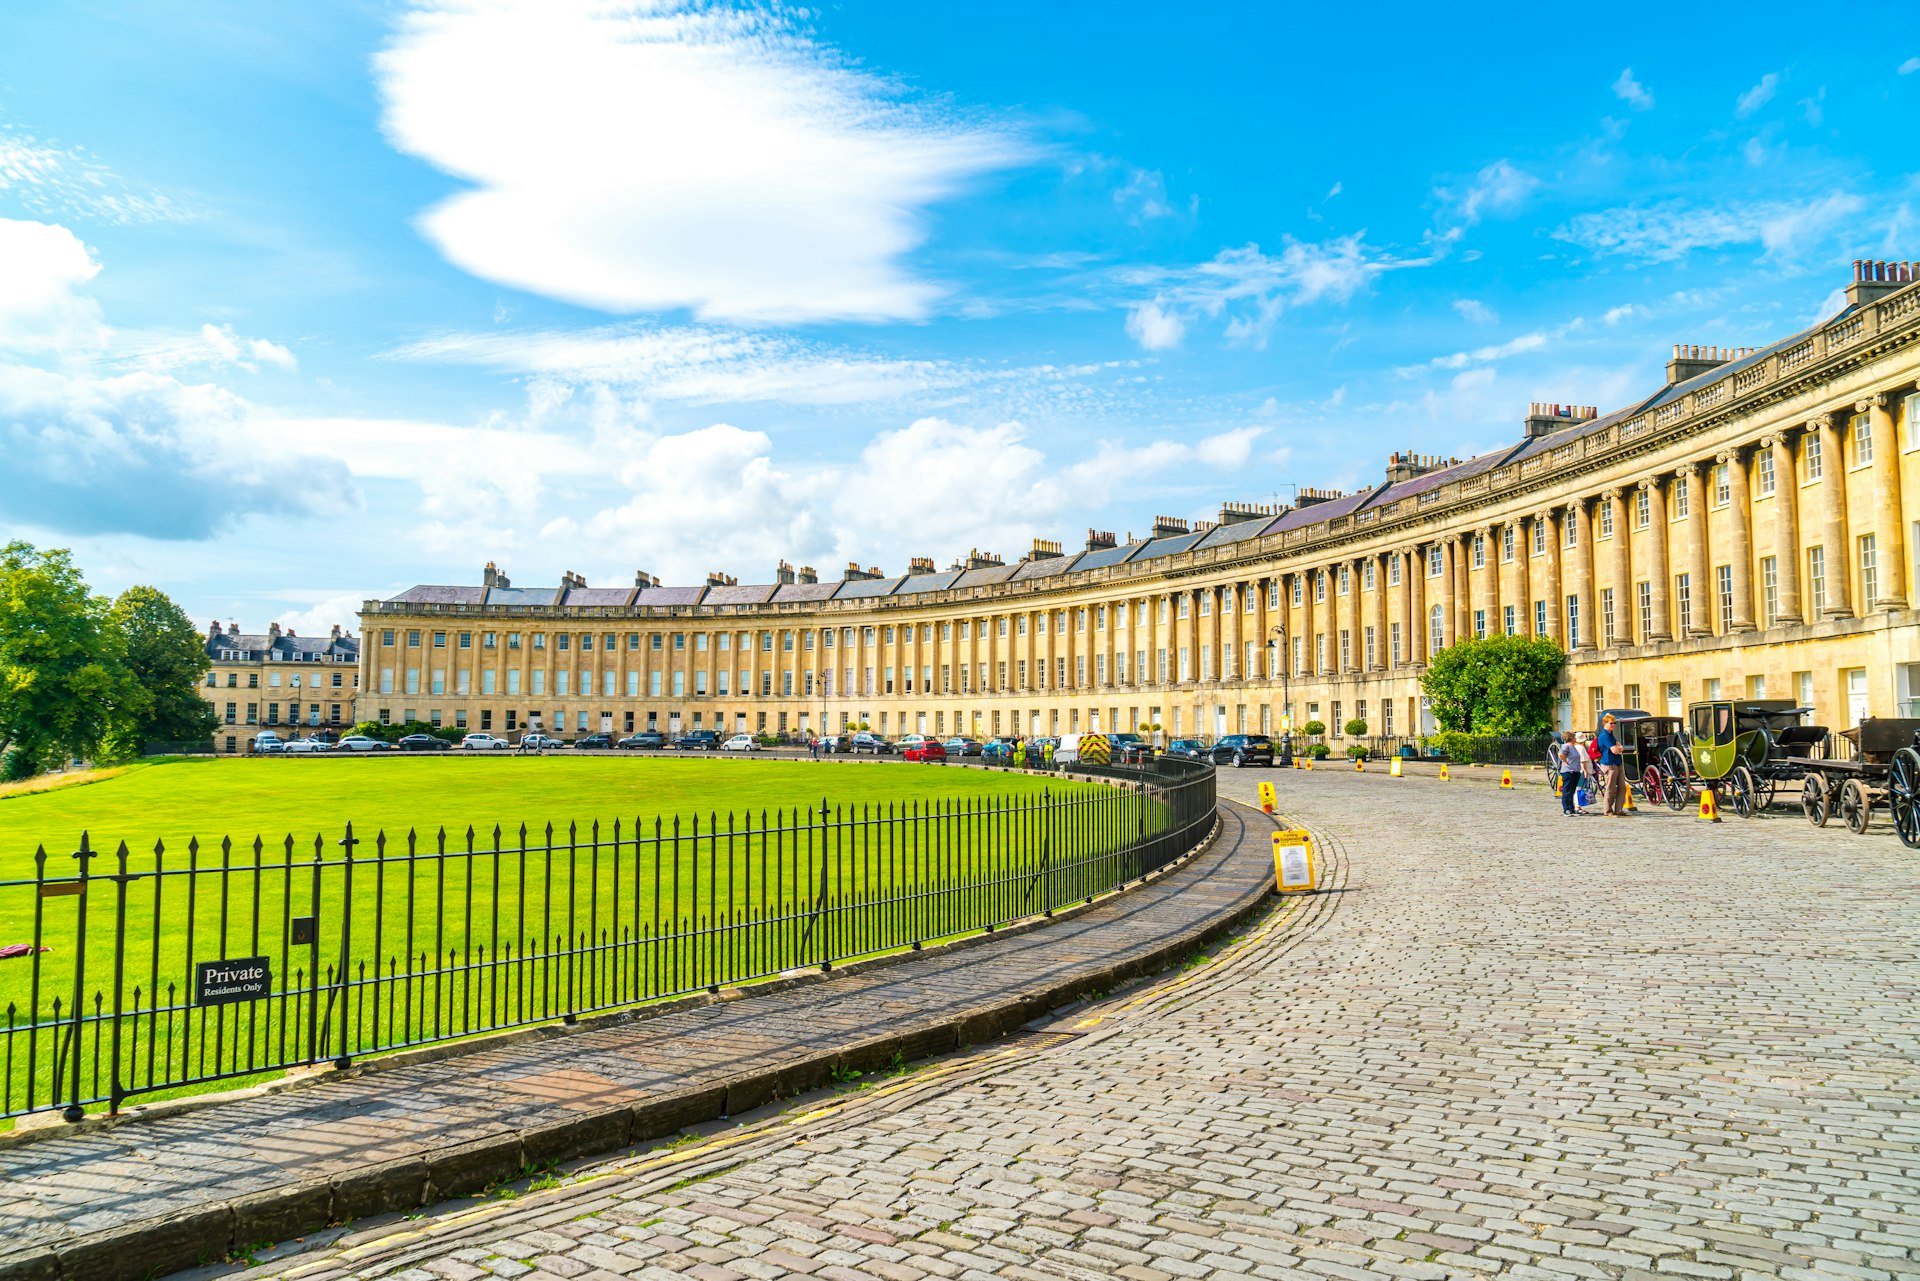 The famous Royal Crescent at Bath, a sweep of Georgian buildings facing a well-tended green.